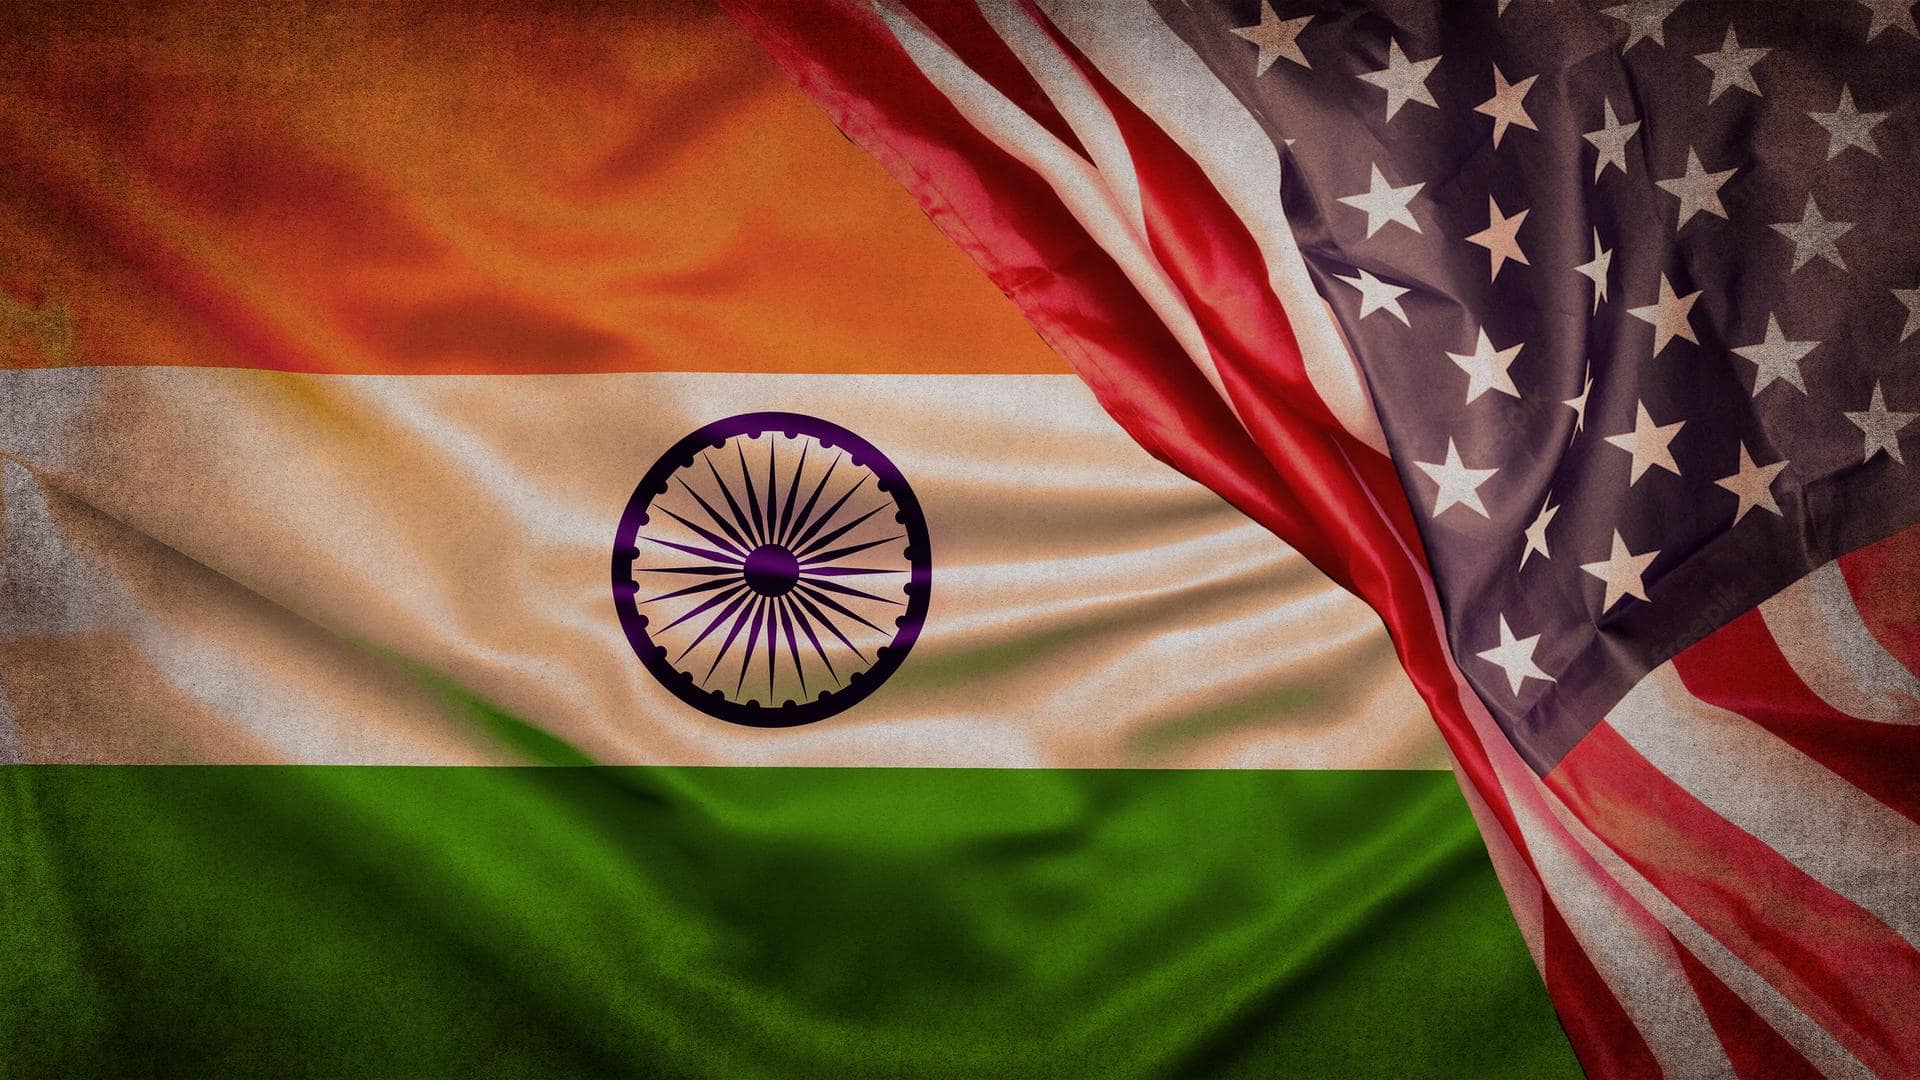 India won't be an ally, but another great power: US